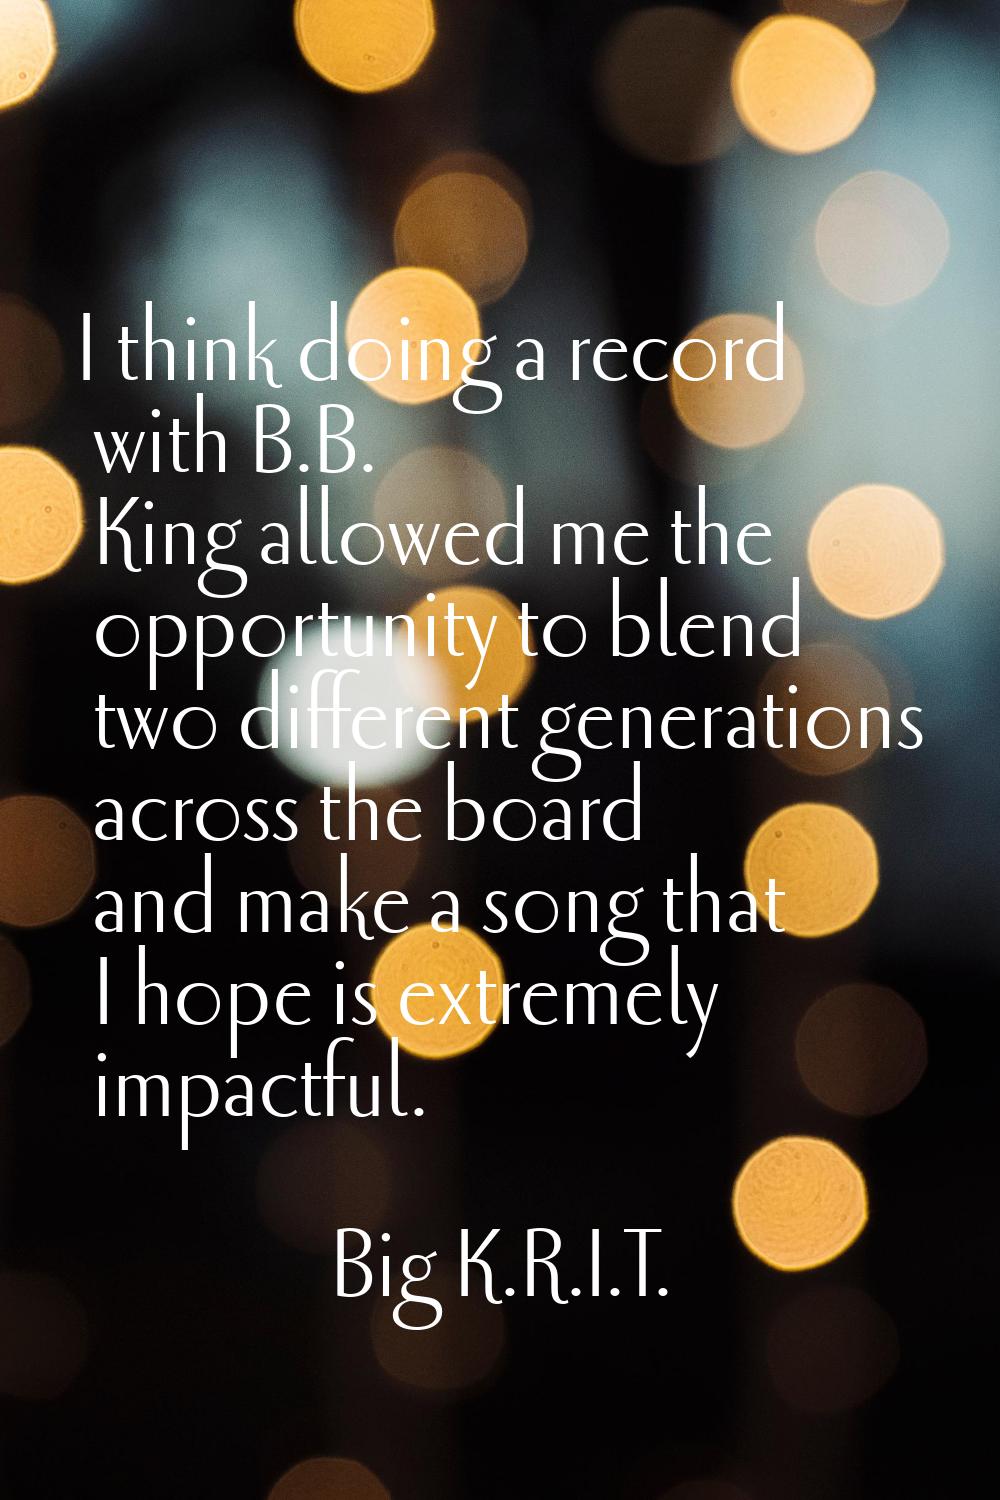 I think doing a record with B.B. King allowed me the opportunity to blend two different generations